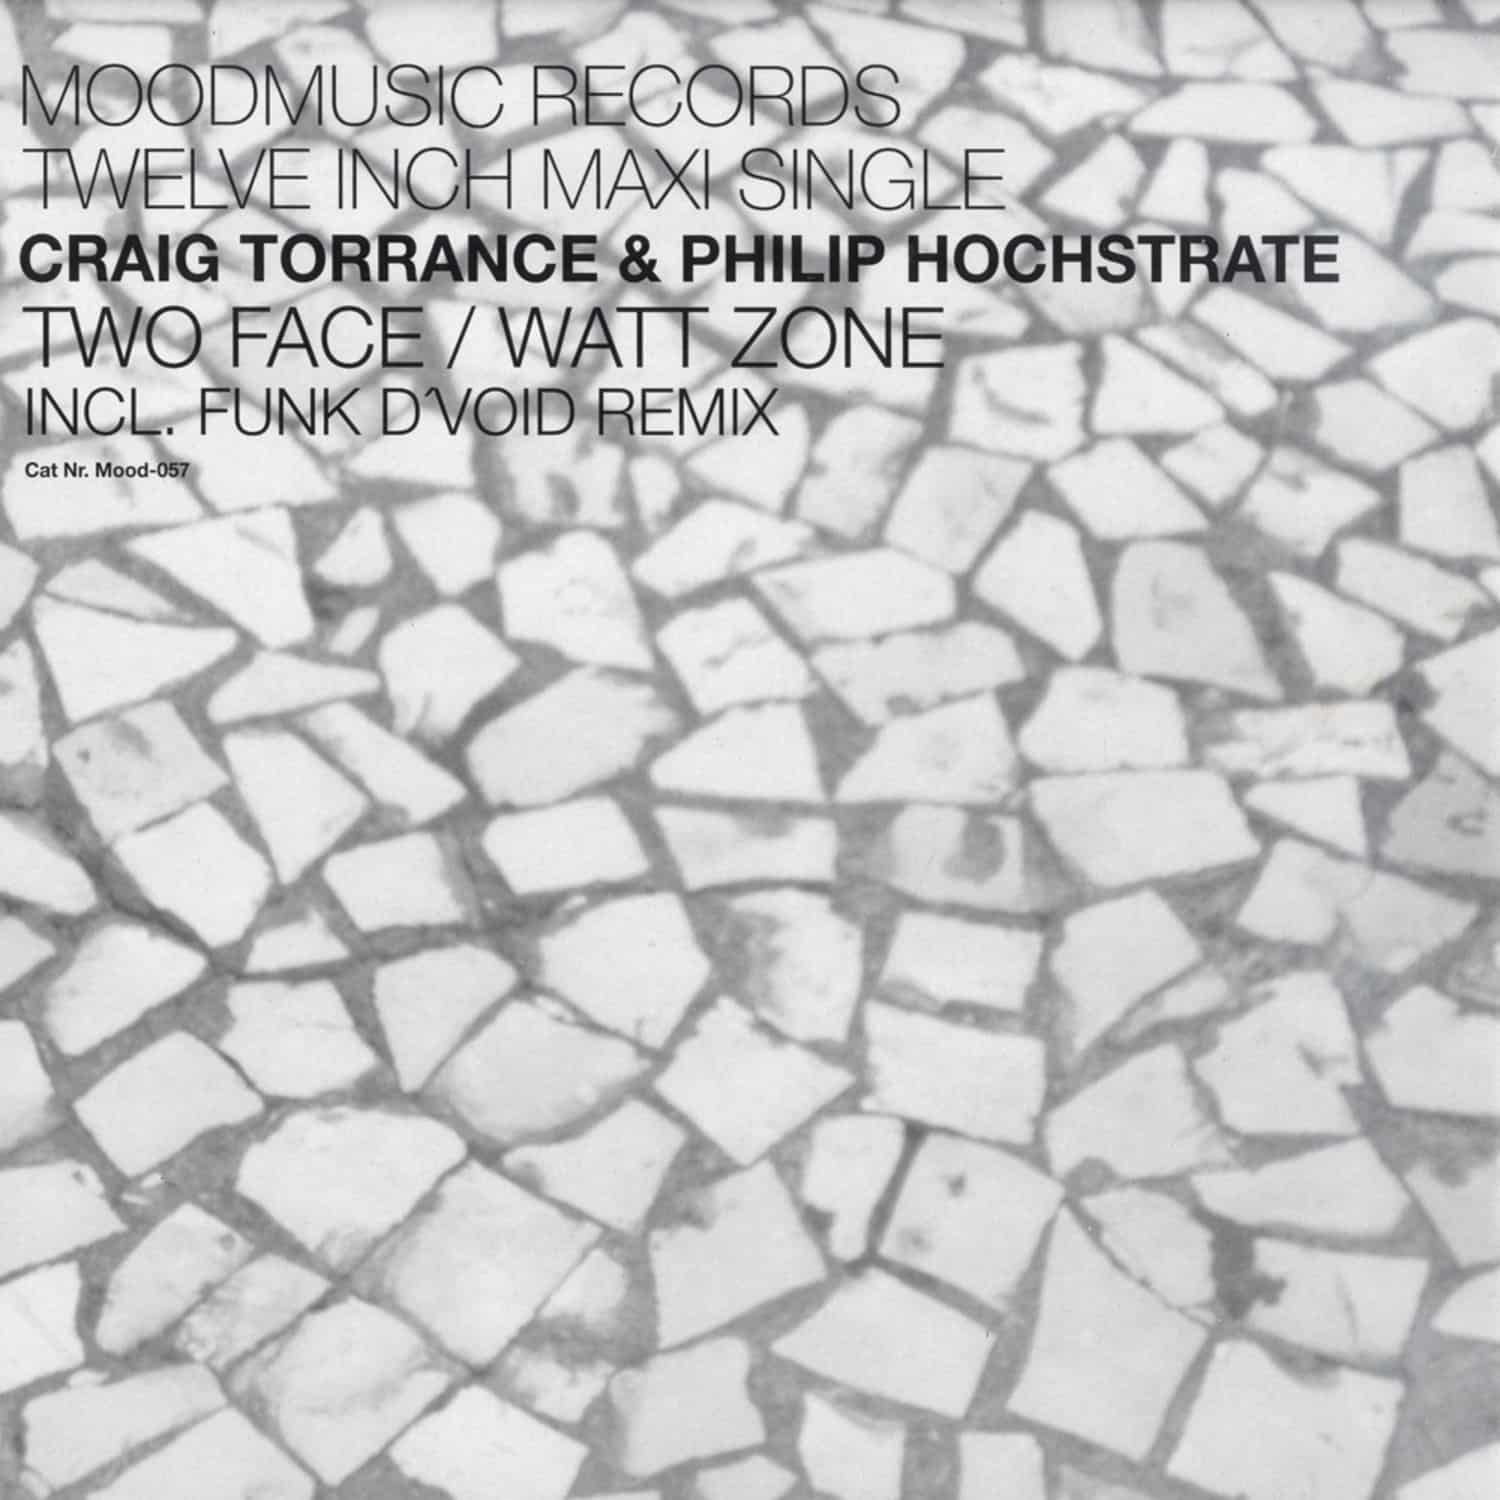 Craig Torrance & Philip Hochstrate - TWO FACE / FUNK D VOID RMX